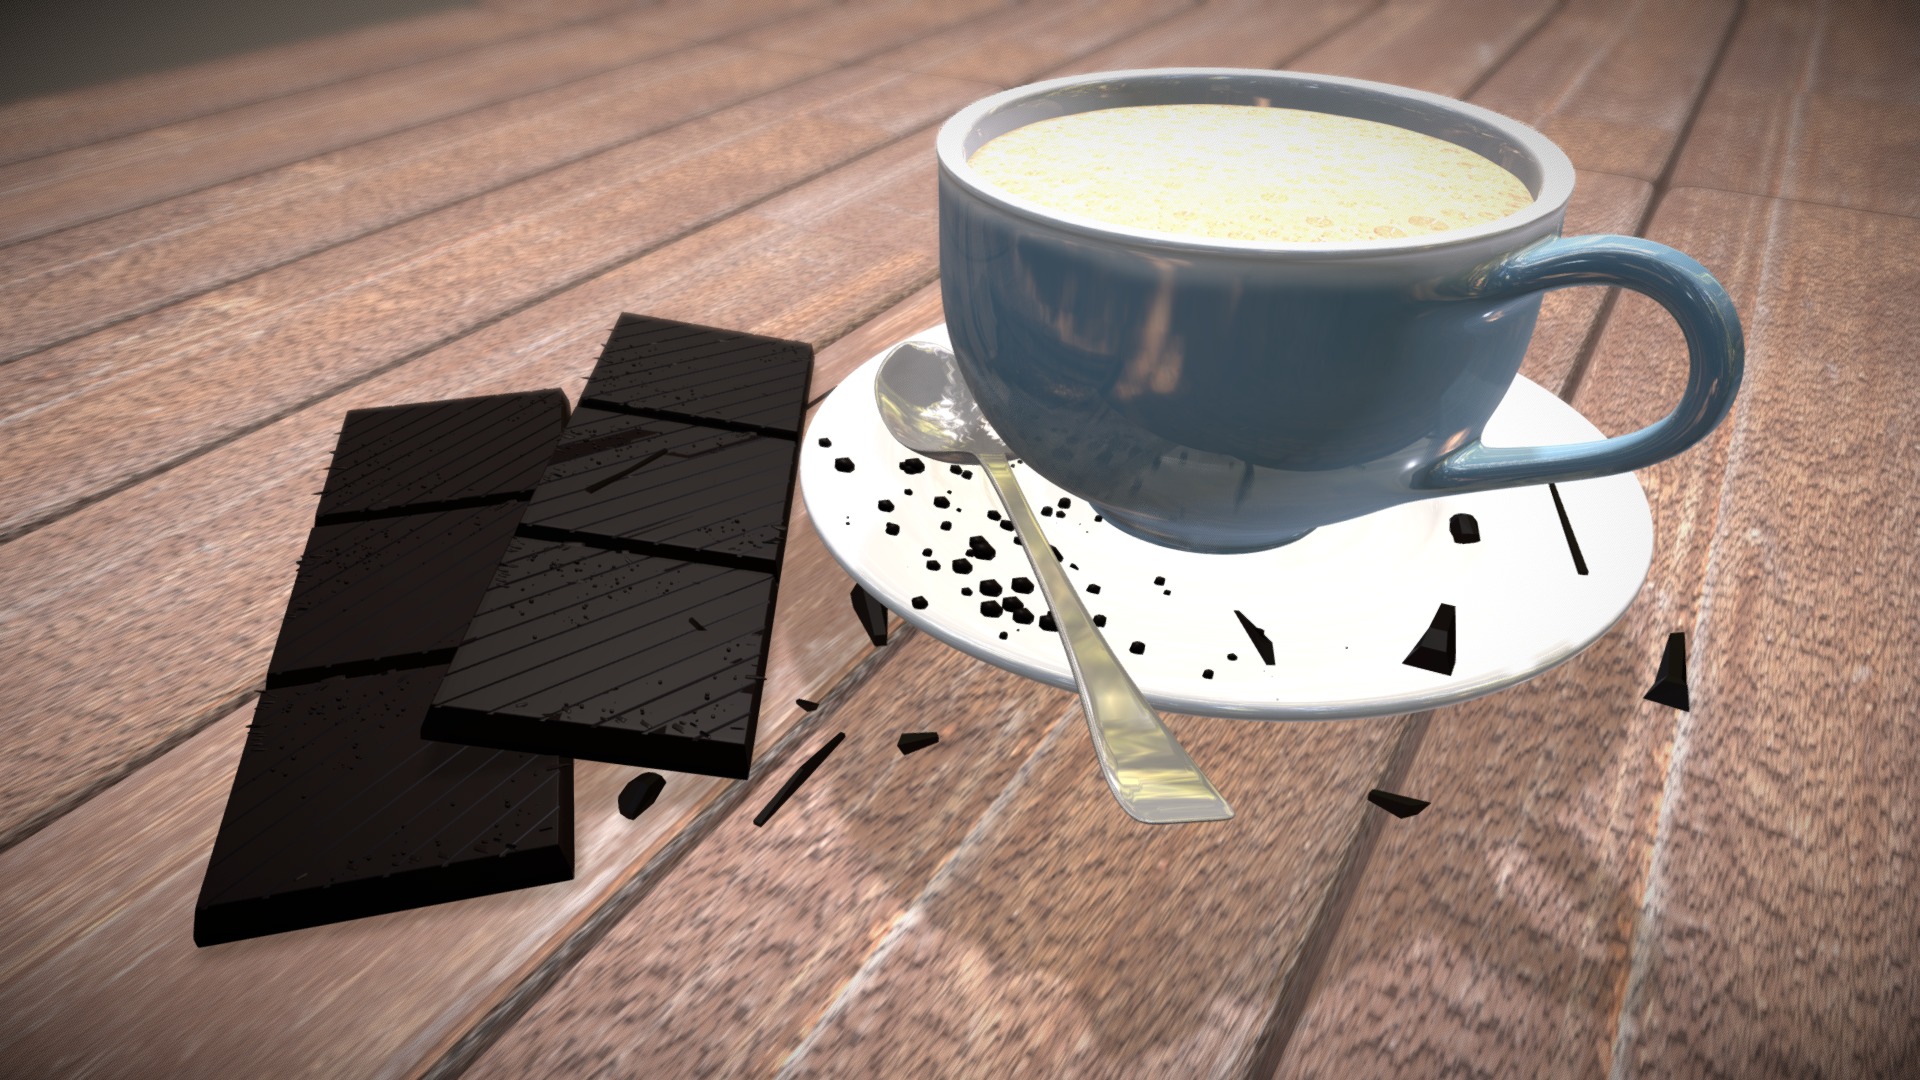 3D model Cafe du Chocolat - This is a 3D model of the Cafe du Chocolat. The 3D model is about a cup of coffee and a spoon on a wooden surface.